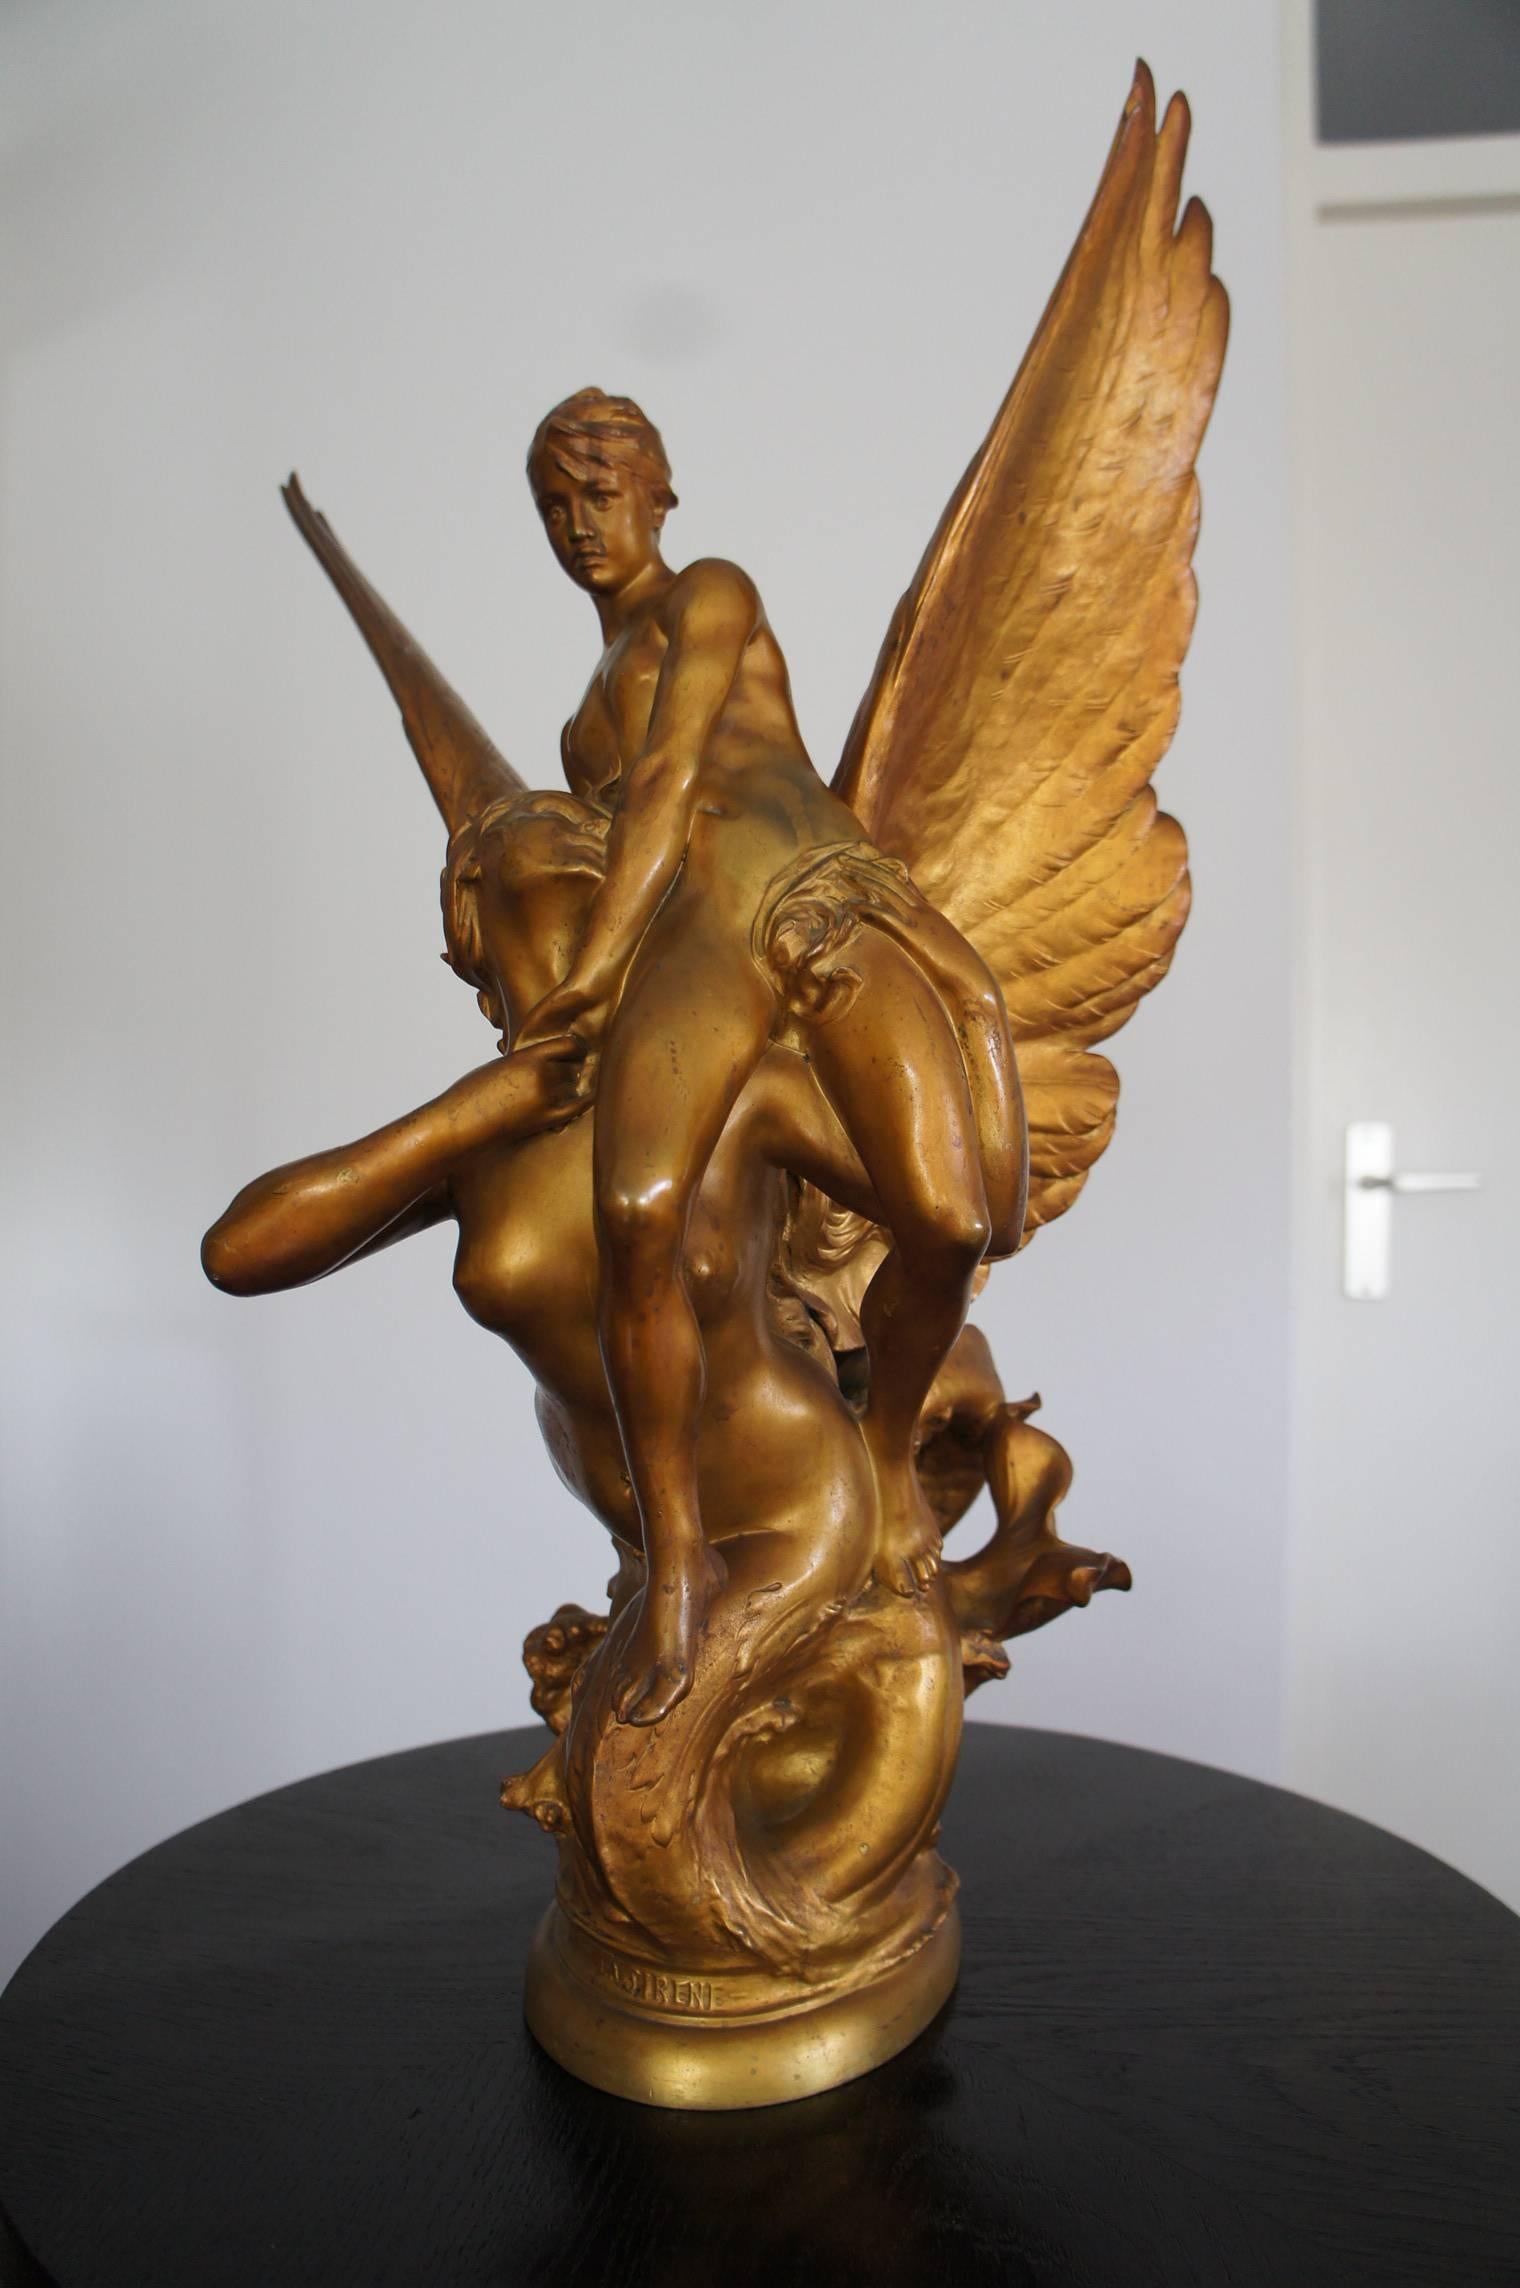 Iconic and impressive, 19th century bronze sculpture.

This large and top quality bronze sculpture is by the world renowned sculpture Denys Puech and the subject matter is of all times. This stunning sculpture tells the story of the singing,